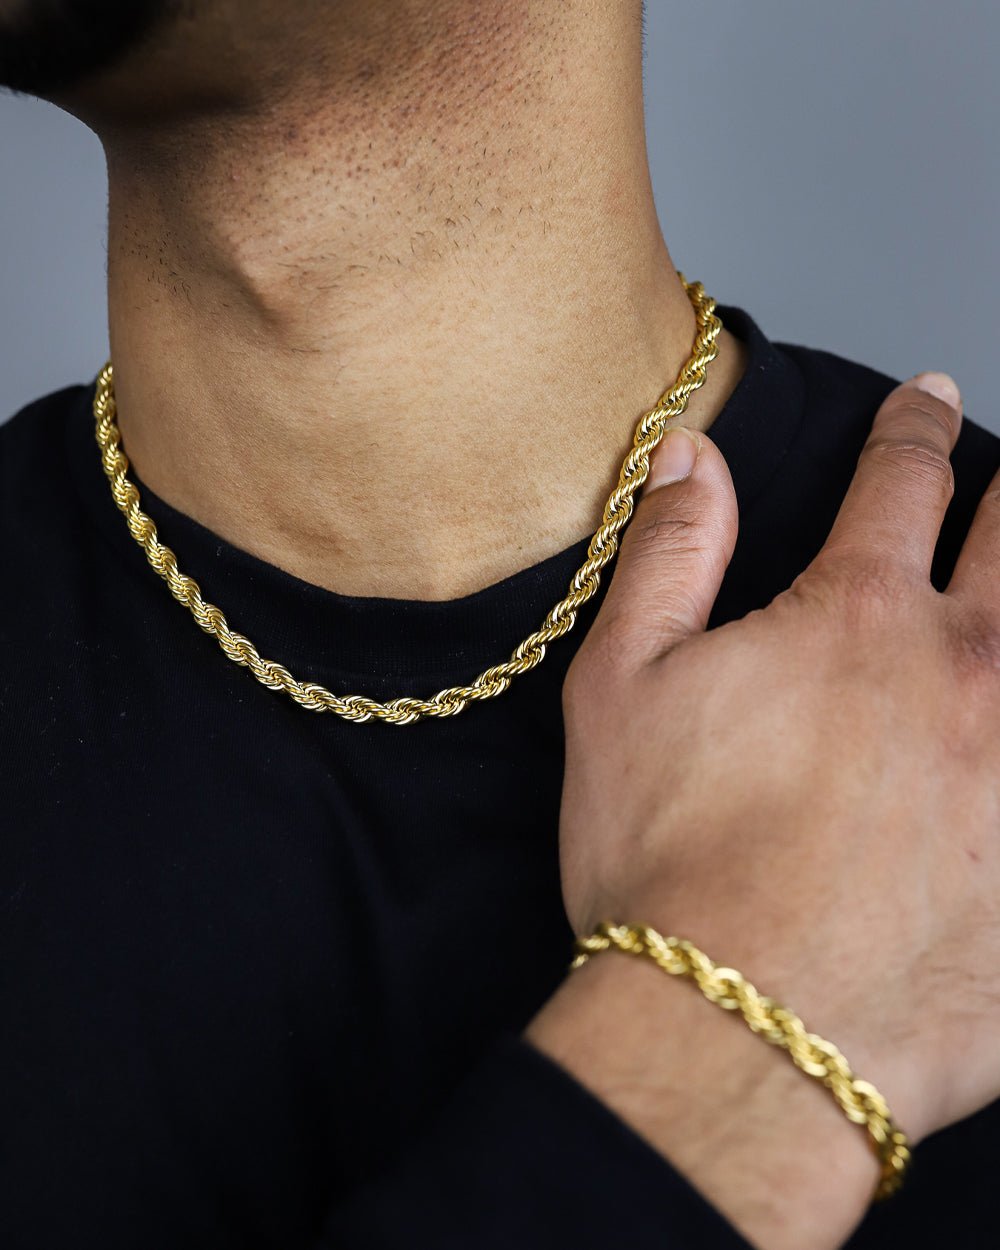 CLEAN ROPE. - 6MM 18K GOLD - Drippy Amsterdam